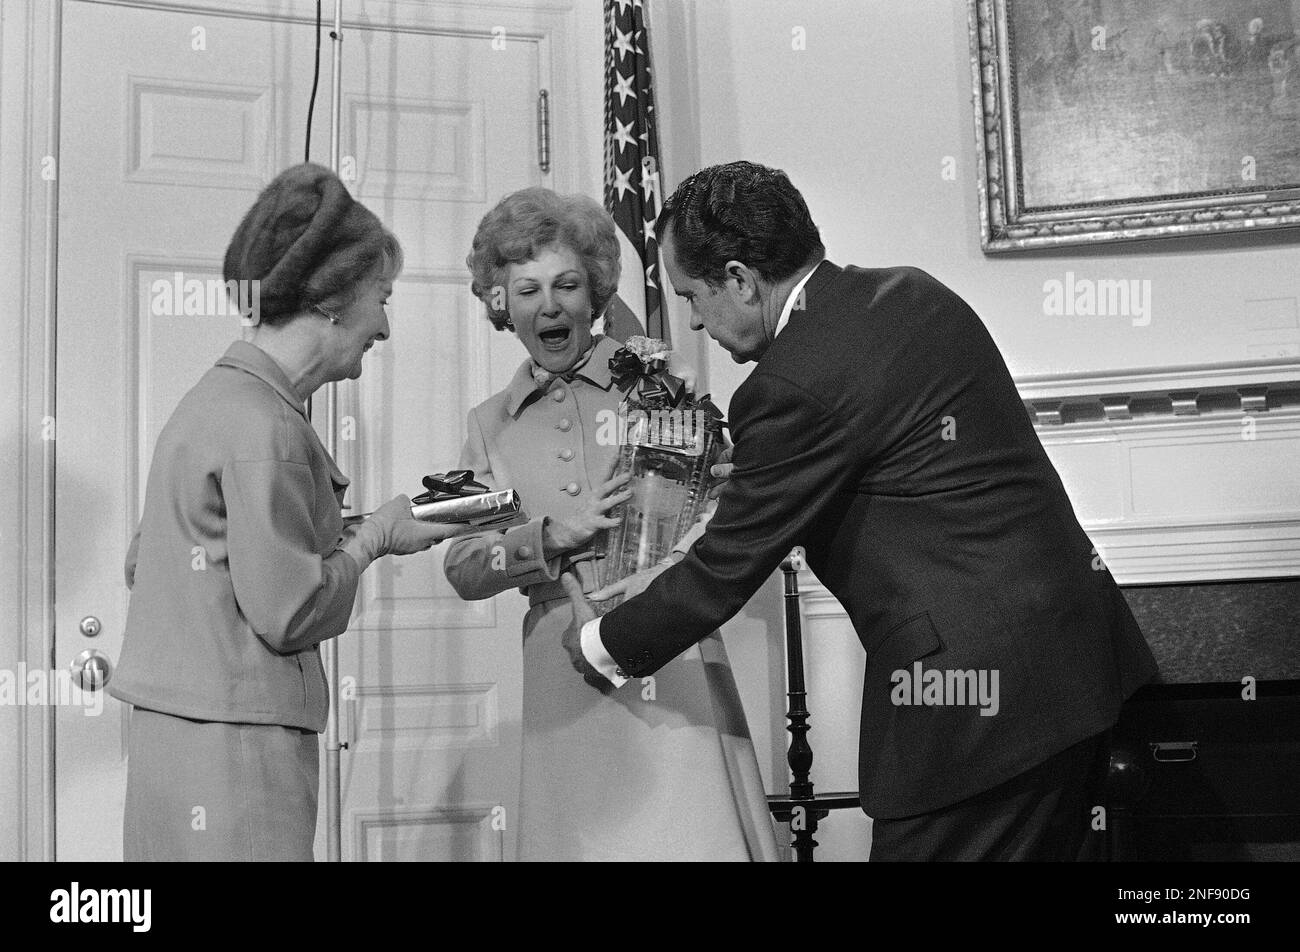 https://c8.alamy.com/comp/2NF90DG/president-richard-nixon-provides-the-helping-hand-as-a-foot-high-waterford-crystal-vase-a-st-patricks-day-gift-starts-slipping-through-the-hands-of-first-lady-pat-nixon-march-17-1969-at-the-white-house-in-washington-at-left-is-lillian-fay-wife-of-irish-amb-william-patrick-fay-with-a-book-of-ireland-photos-which-she-presented-to-mrs-nixon-the-vase-a-gift-from-the-irish-visitors-was-specially-designed-for-the-occasion-and-bears-an-etching-of-the-white-house-ap-photo-2NF90DG.jpg